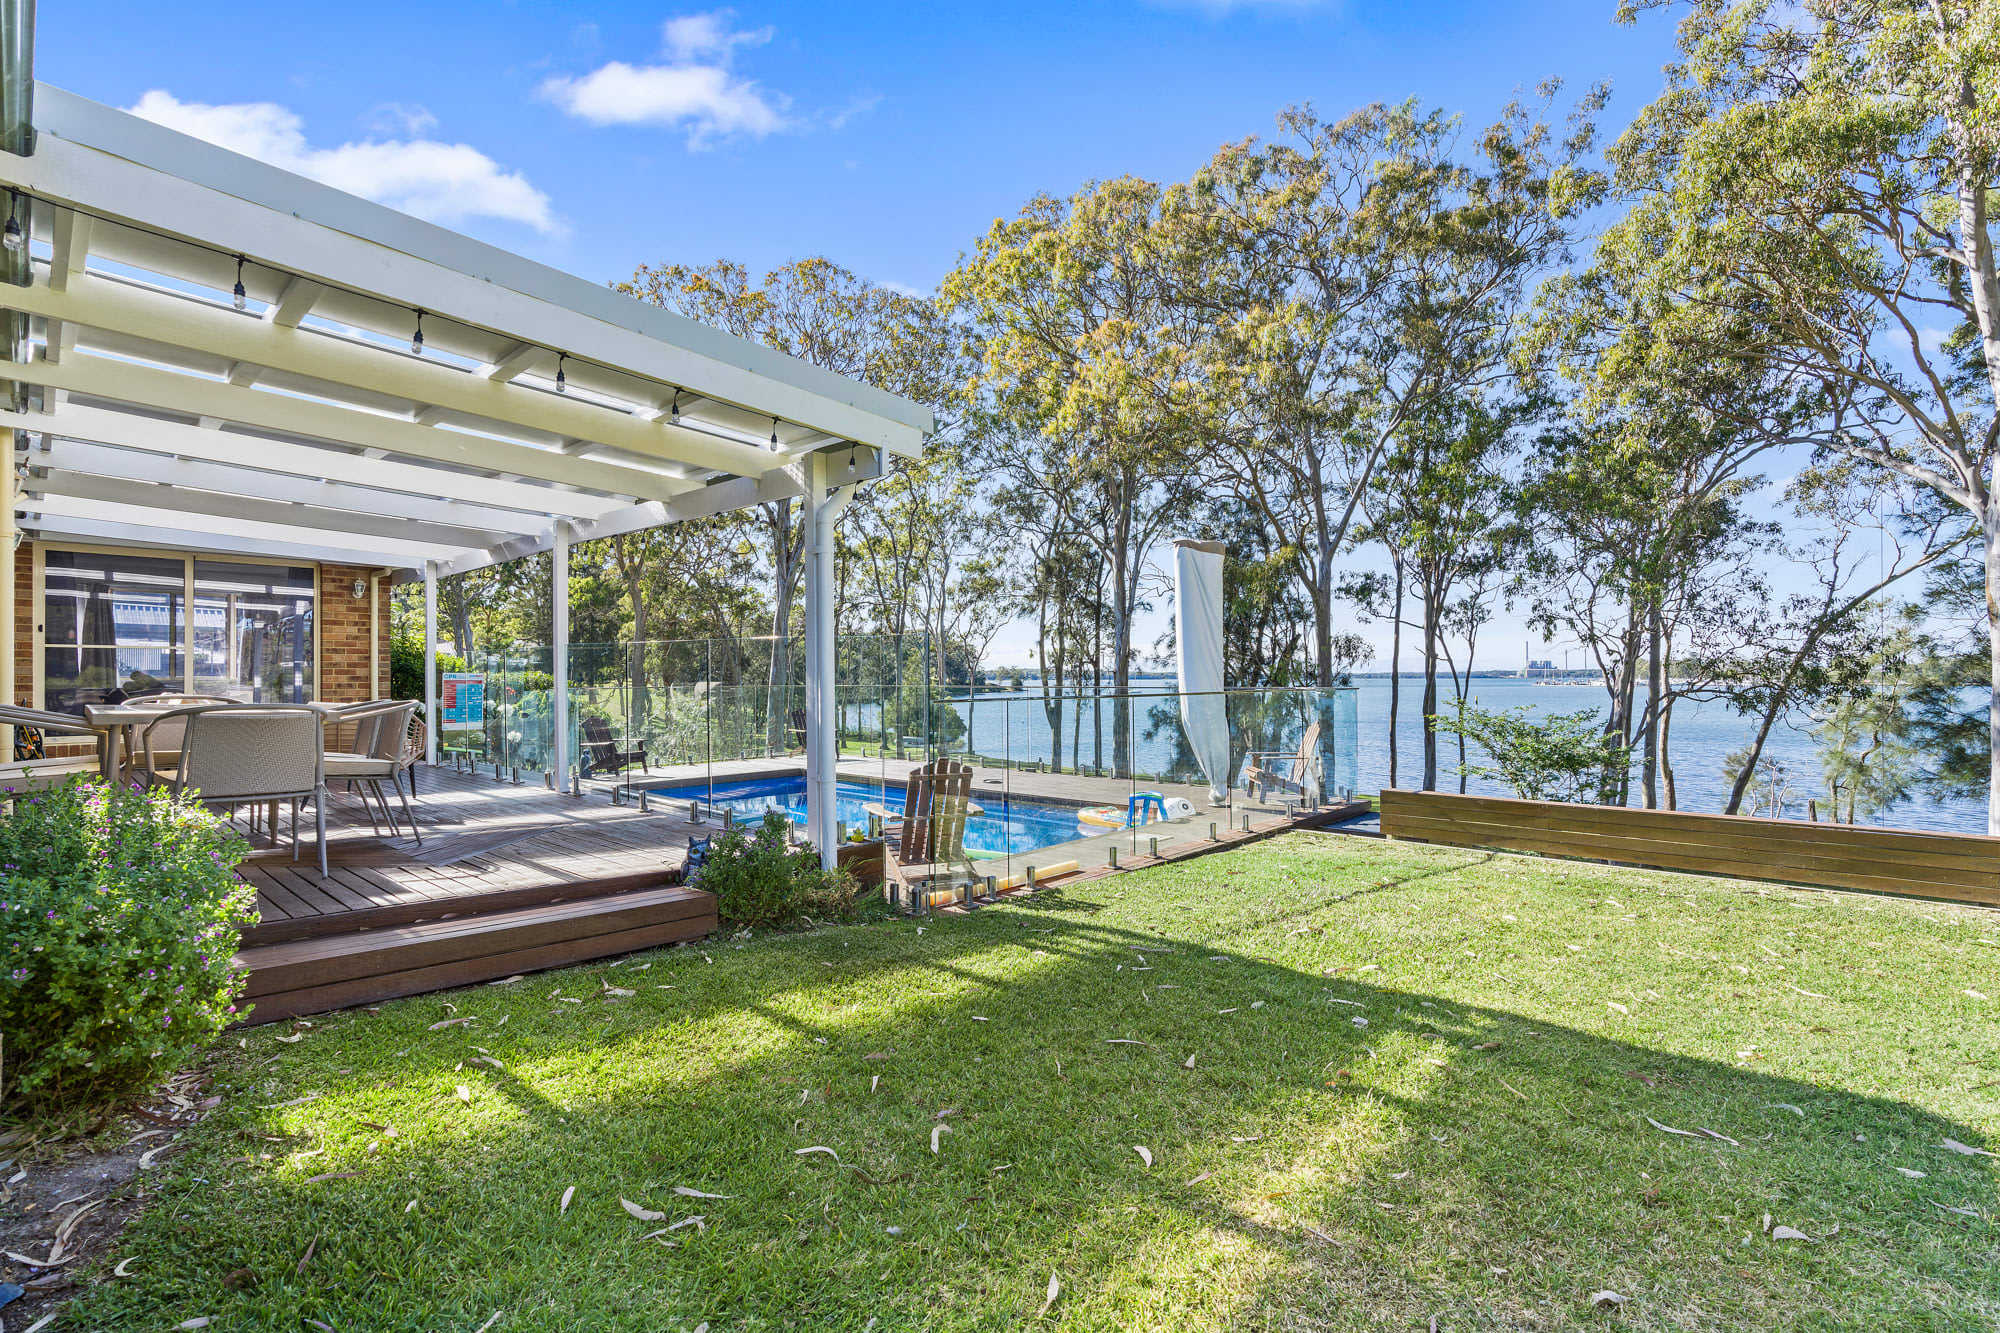 Watch the magical sunsets and enjoy dining al fresco in the outdoor entertaining space